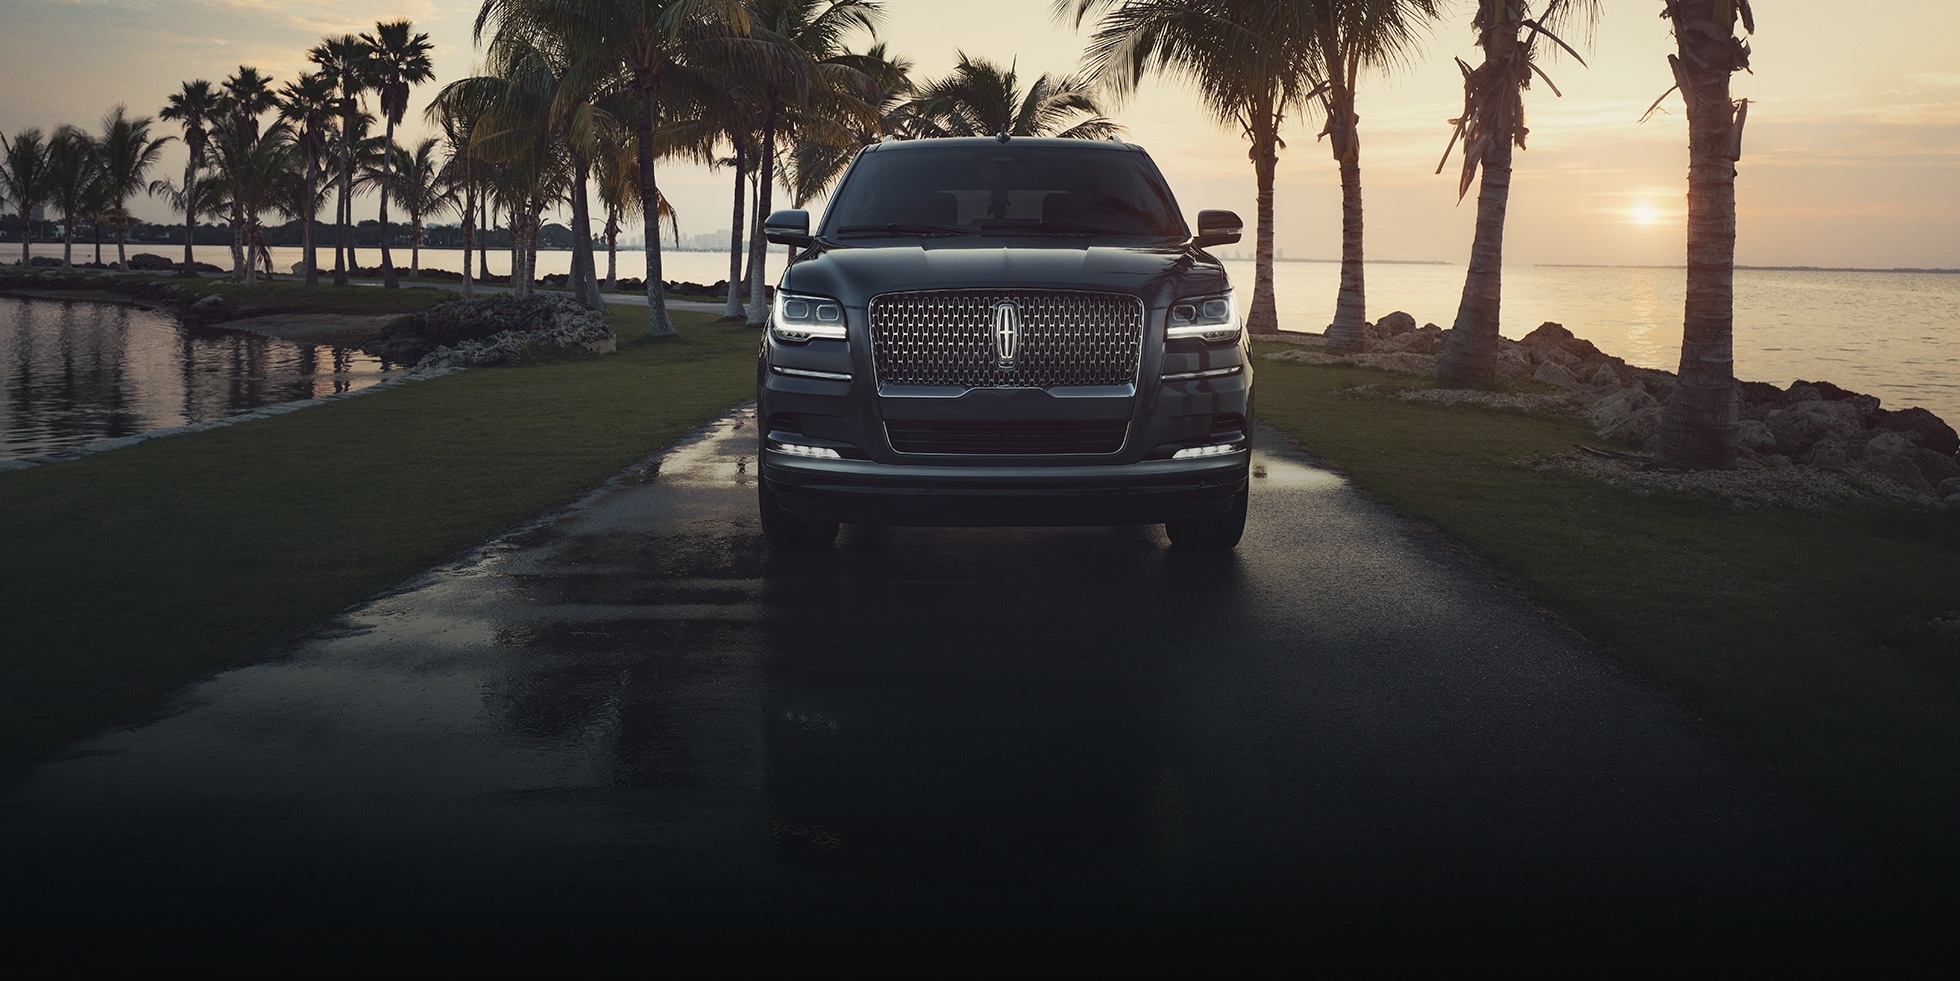 The 2023 Lincoln Navigator parked on a road in front of the ocean.